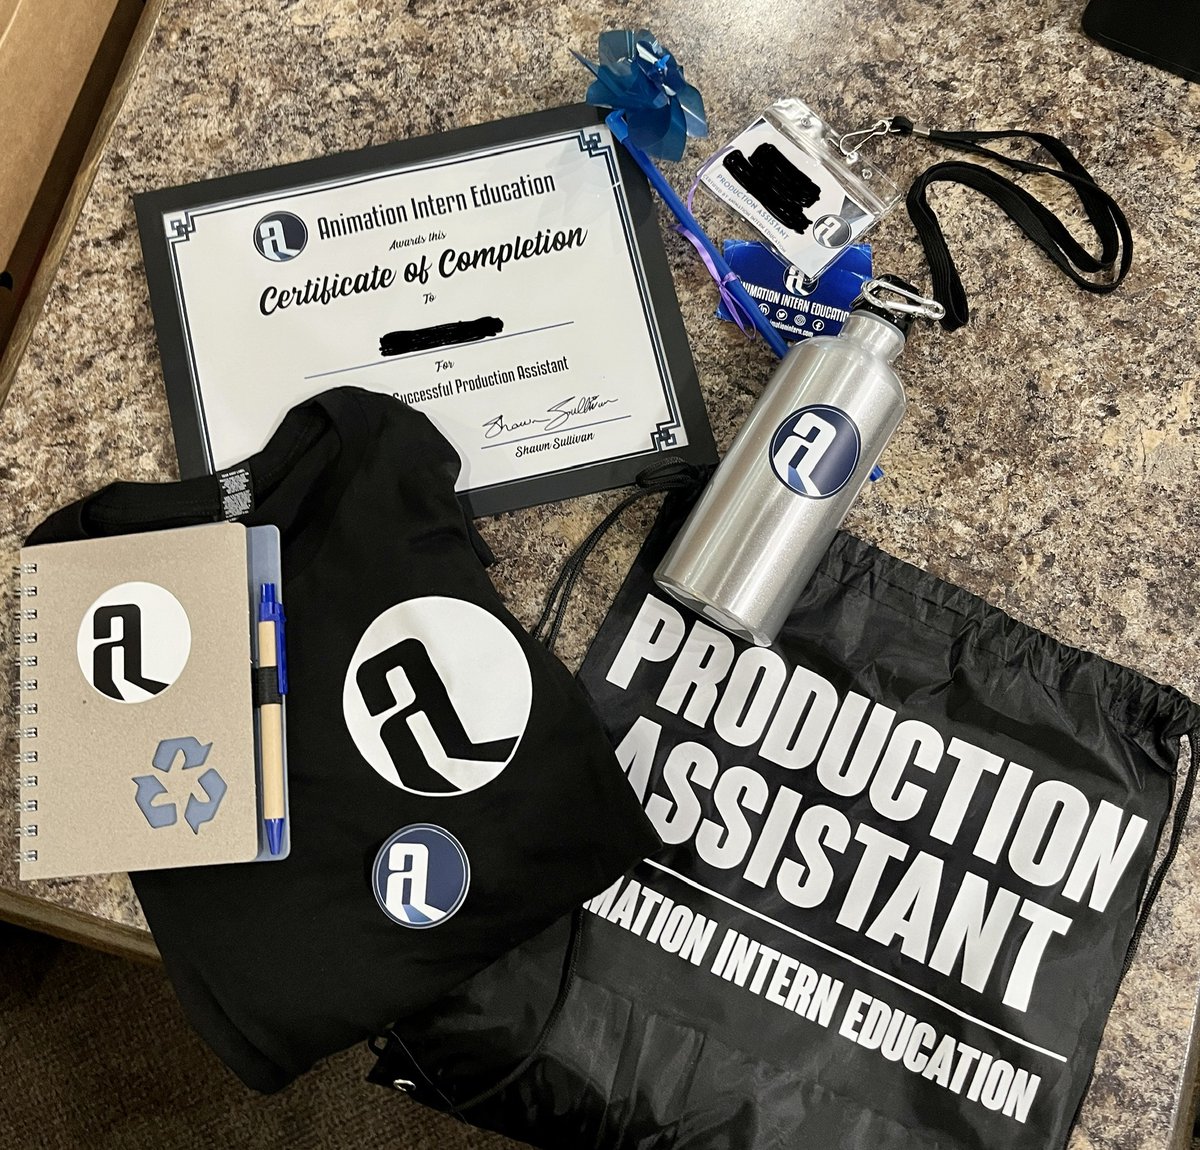 Congratulations to all of our TRUSD students who just earned their Production Assistant certificate! We had a great time celebrating all of you at the wrap party. Keep up the incredible work, we can’t wait to see what you create!